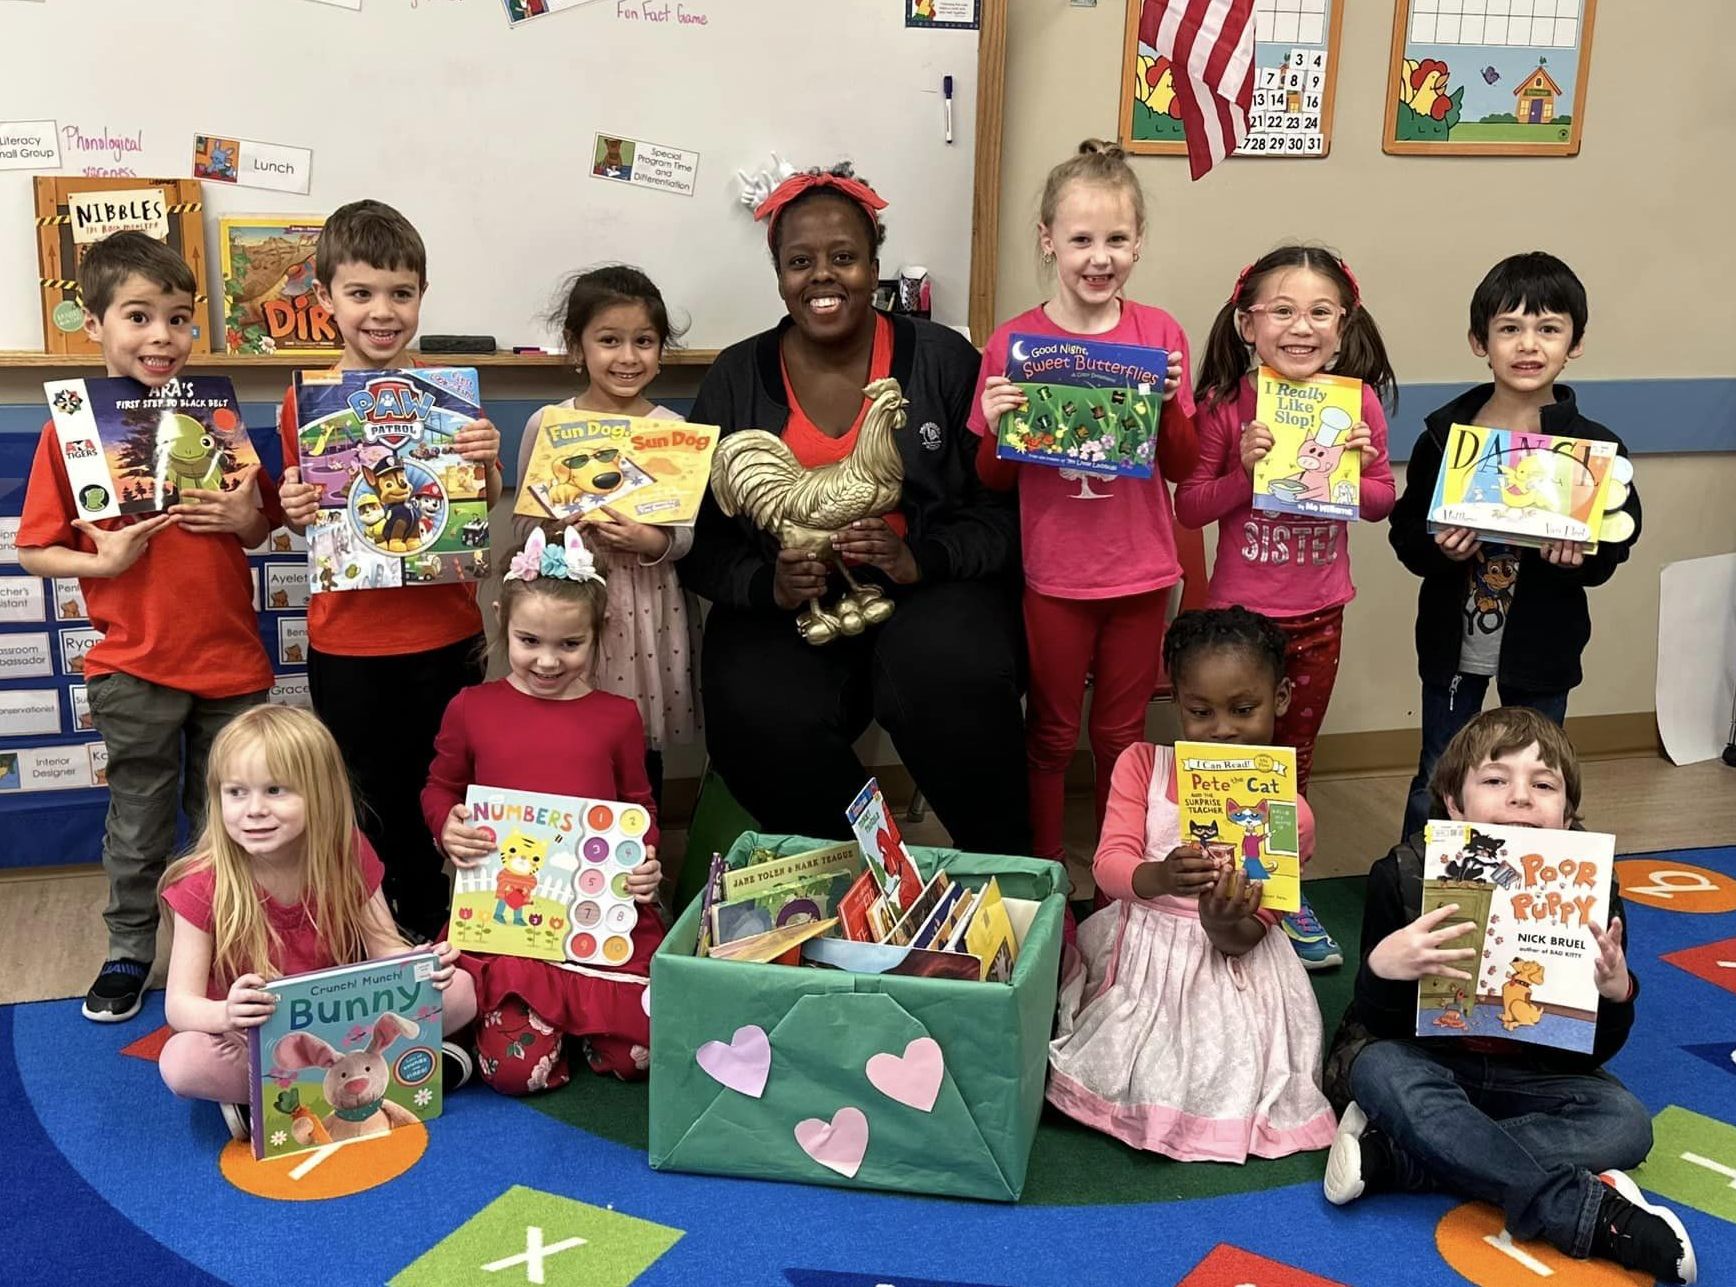 Og's book drive daycare st.peters school st.charles 